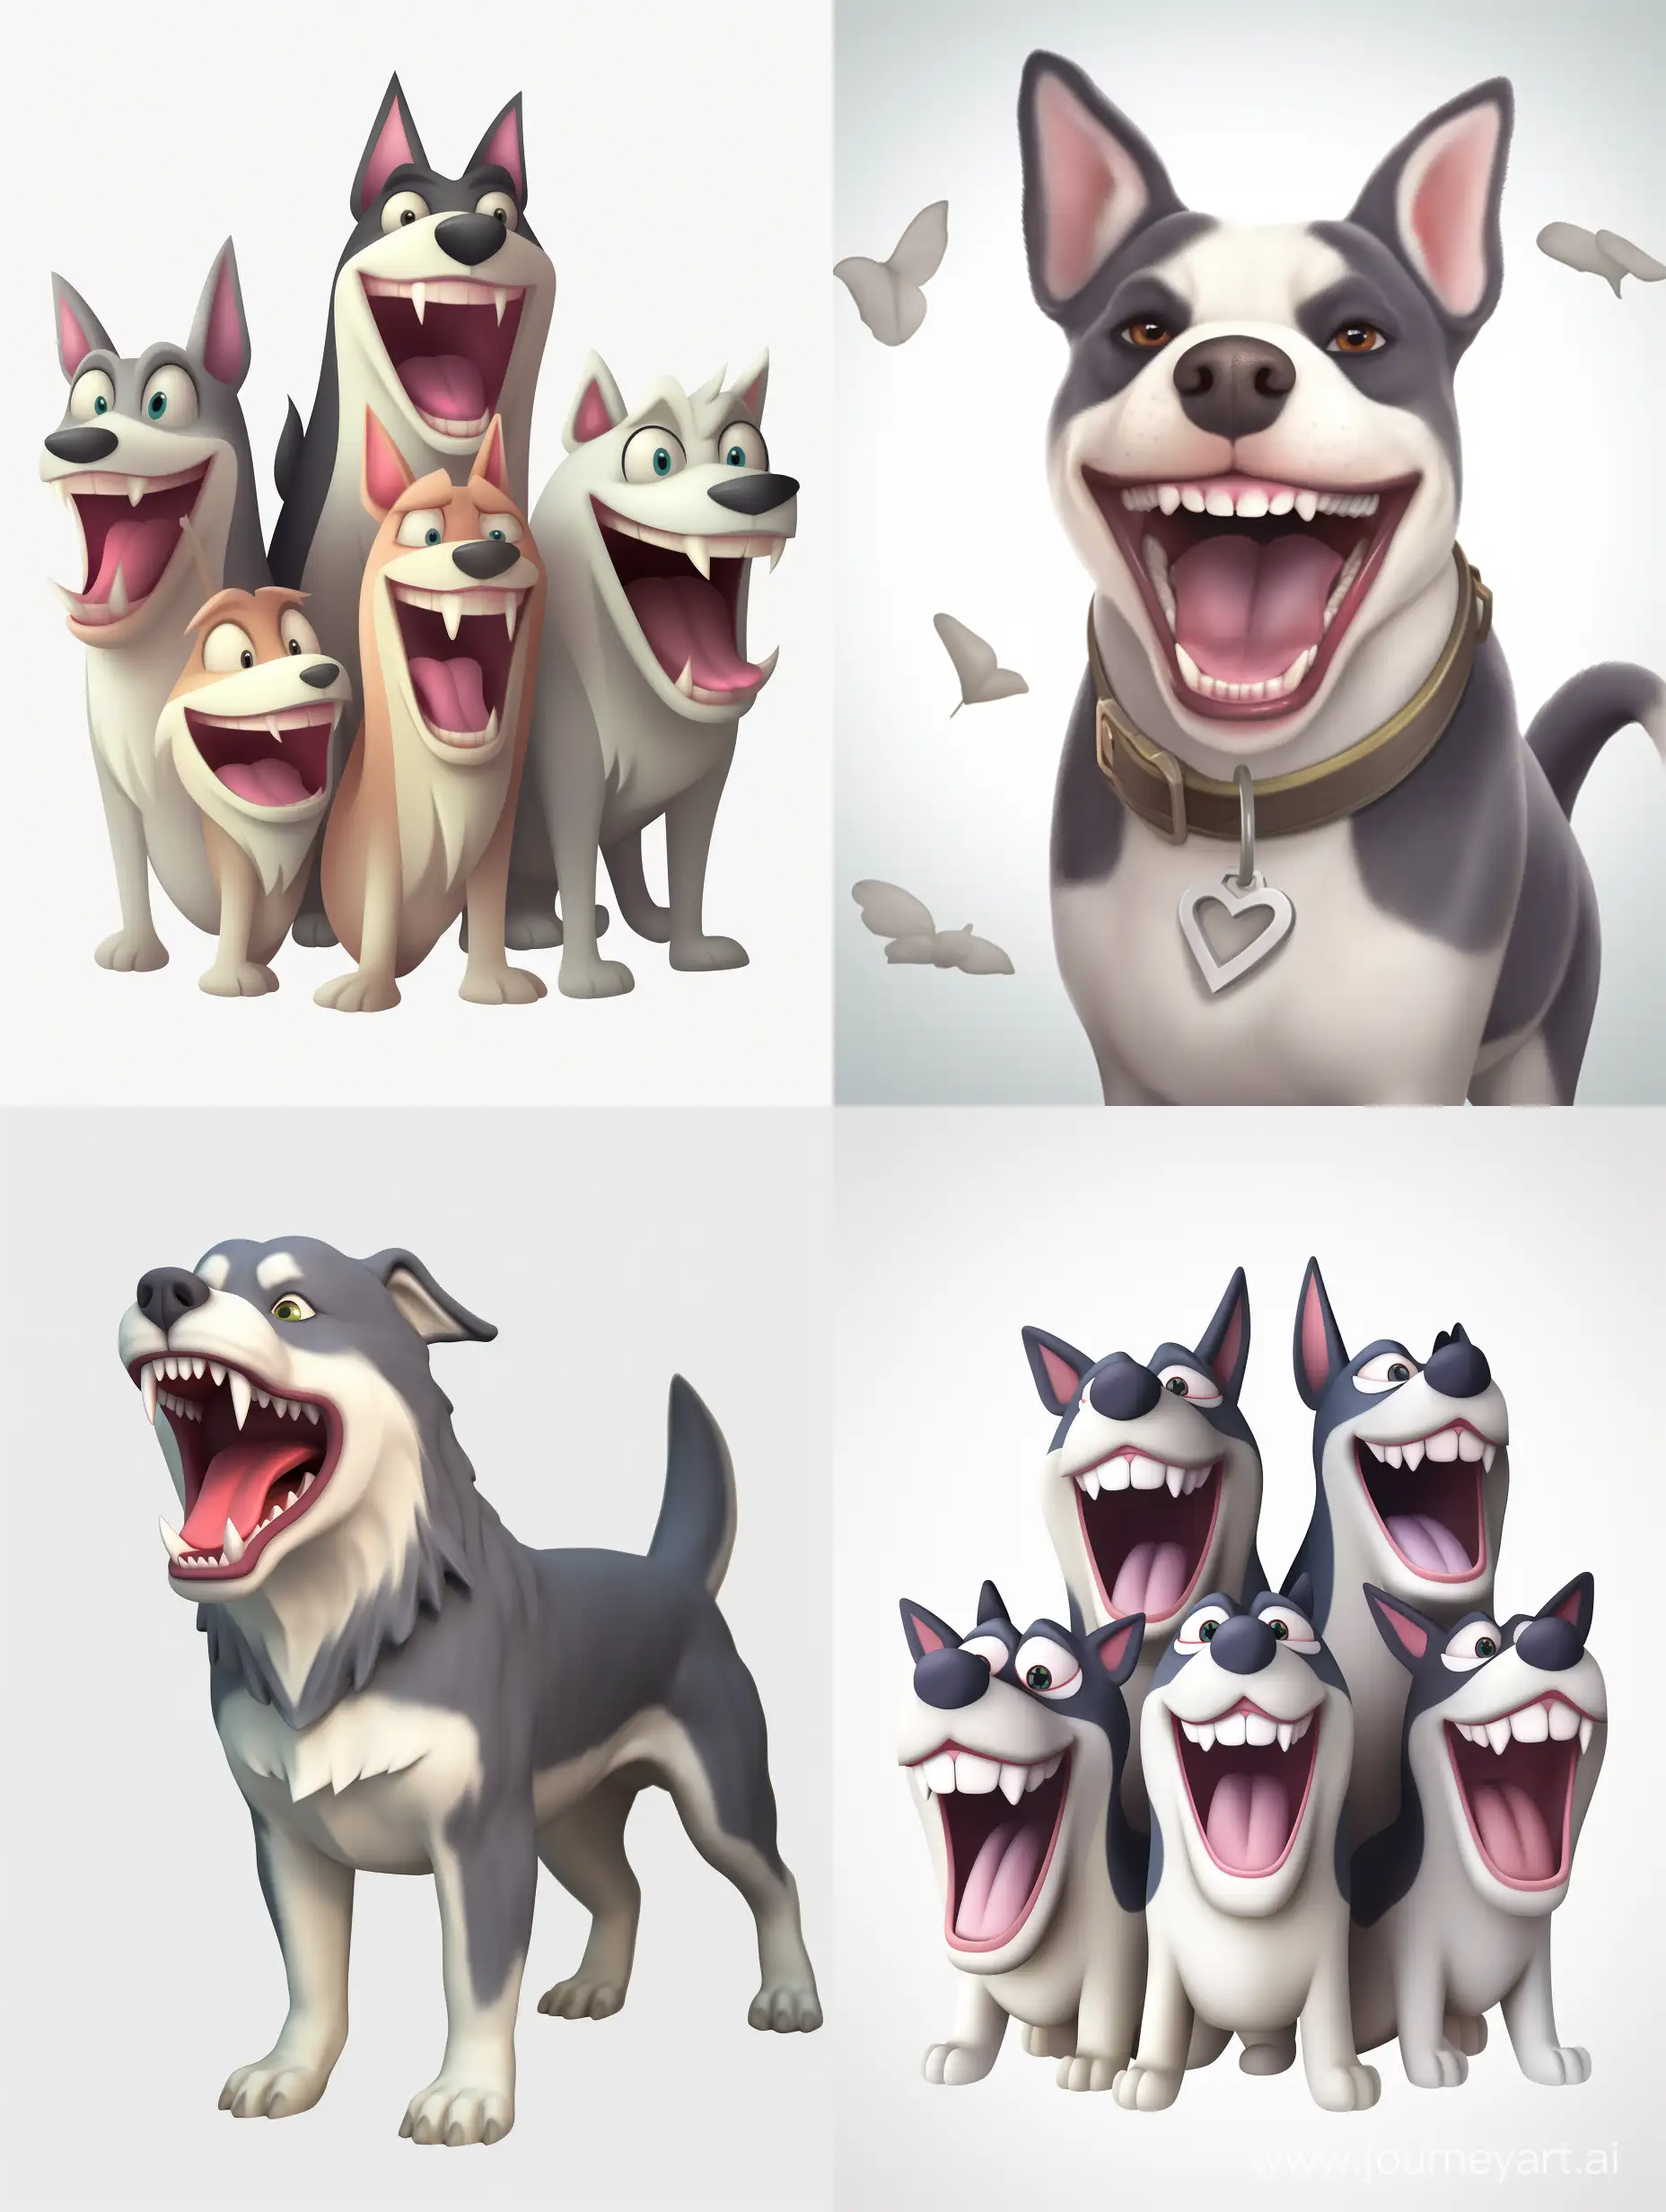 imagine a lovable husky character, multiple poses and expresions, 100%20white background, childrens book illustration style, simple, cute, full colour, 3D model, light and shadow, --no outline